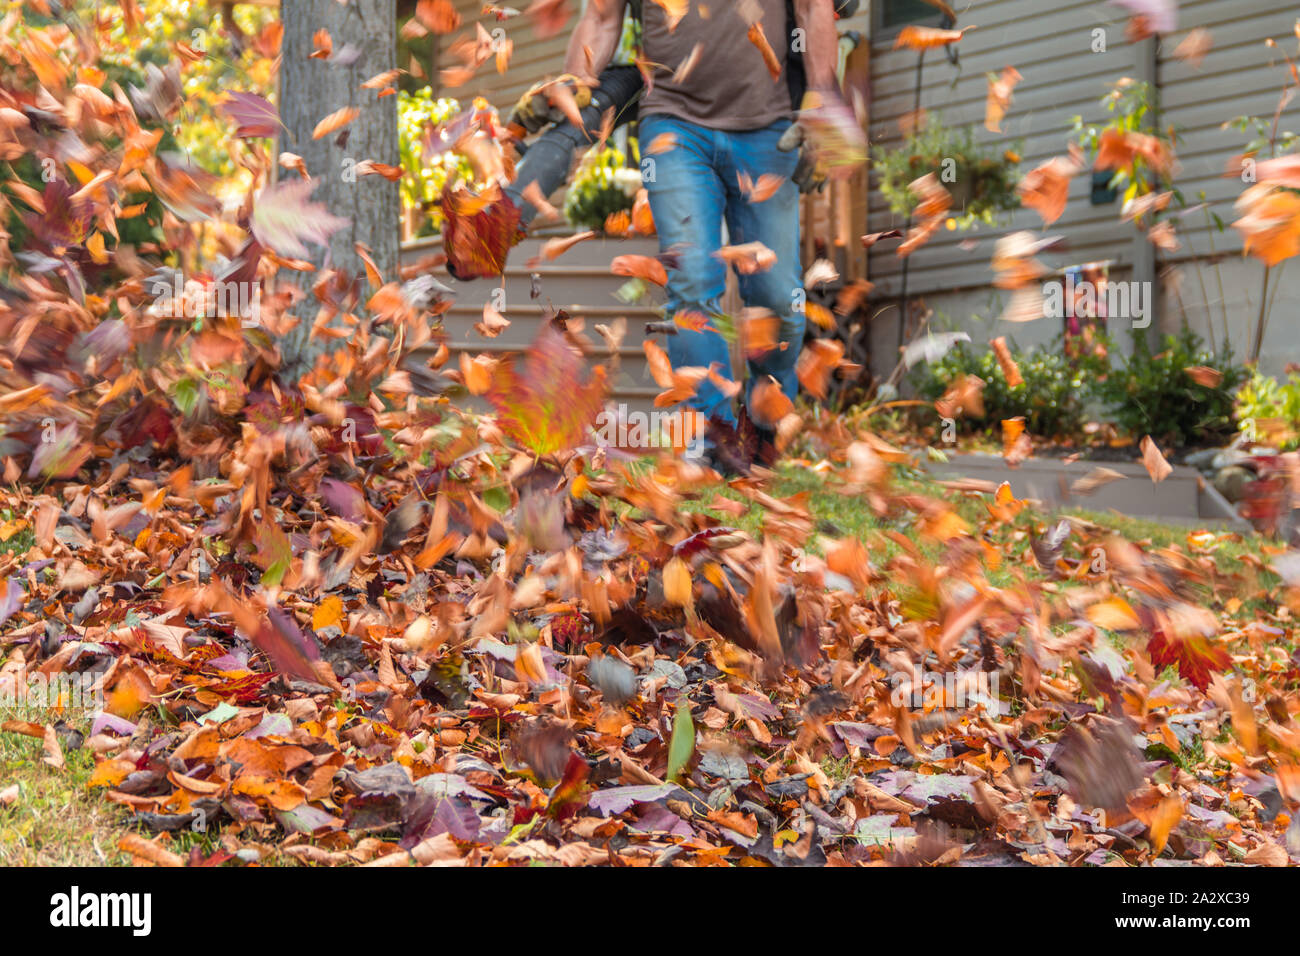 Leaf blower in action moving colorful fall leaves from residential lawn with intentional motion blur Stock Photo